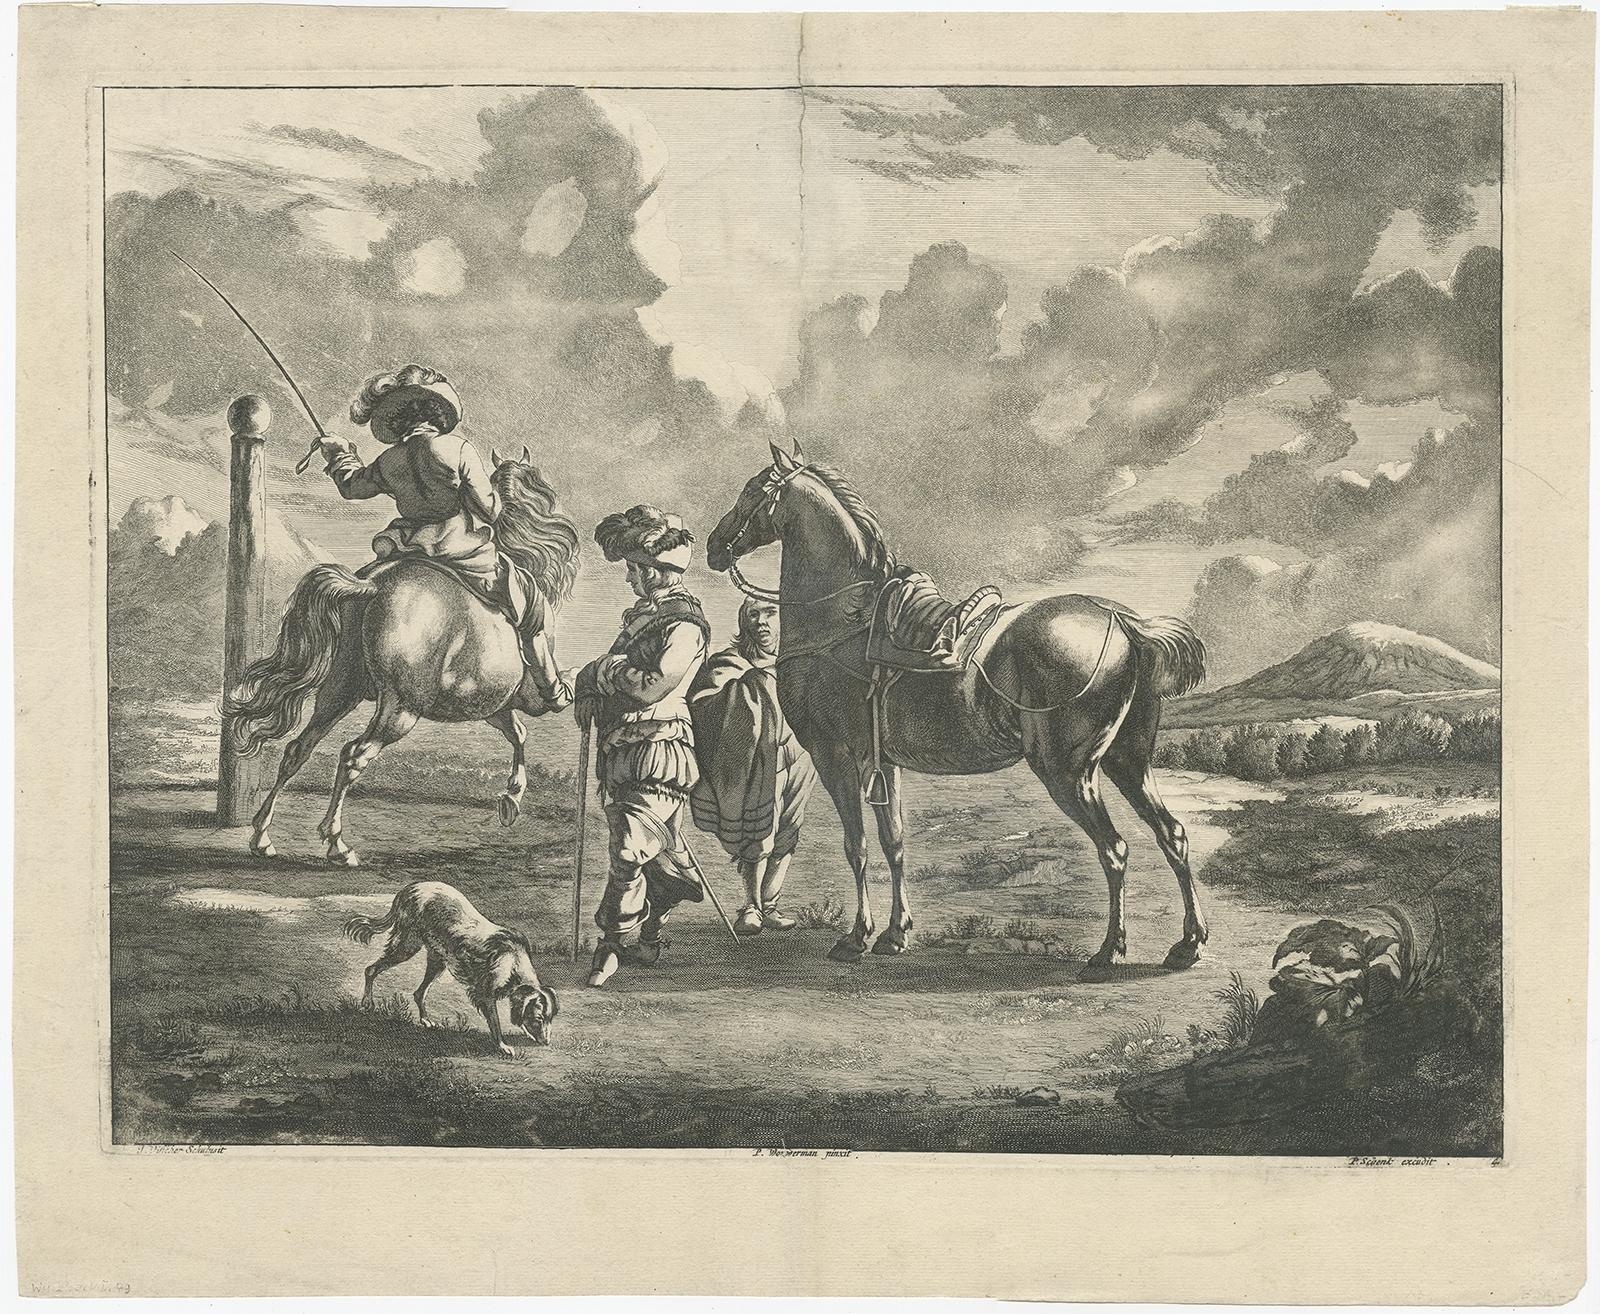 Antique print of a landscape with two horses and horsemen. 

Made after a painting by Philips Wouwerman. Source unknown, to be determined. 

Artists and Engravers: Engraved by J. Visscher after Philips Wouwerman (1619-1668) was a Dutch painter